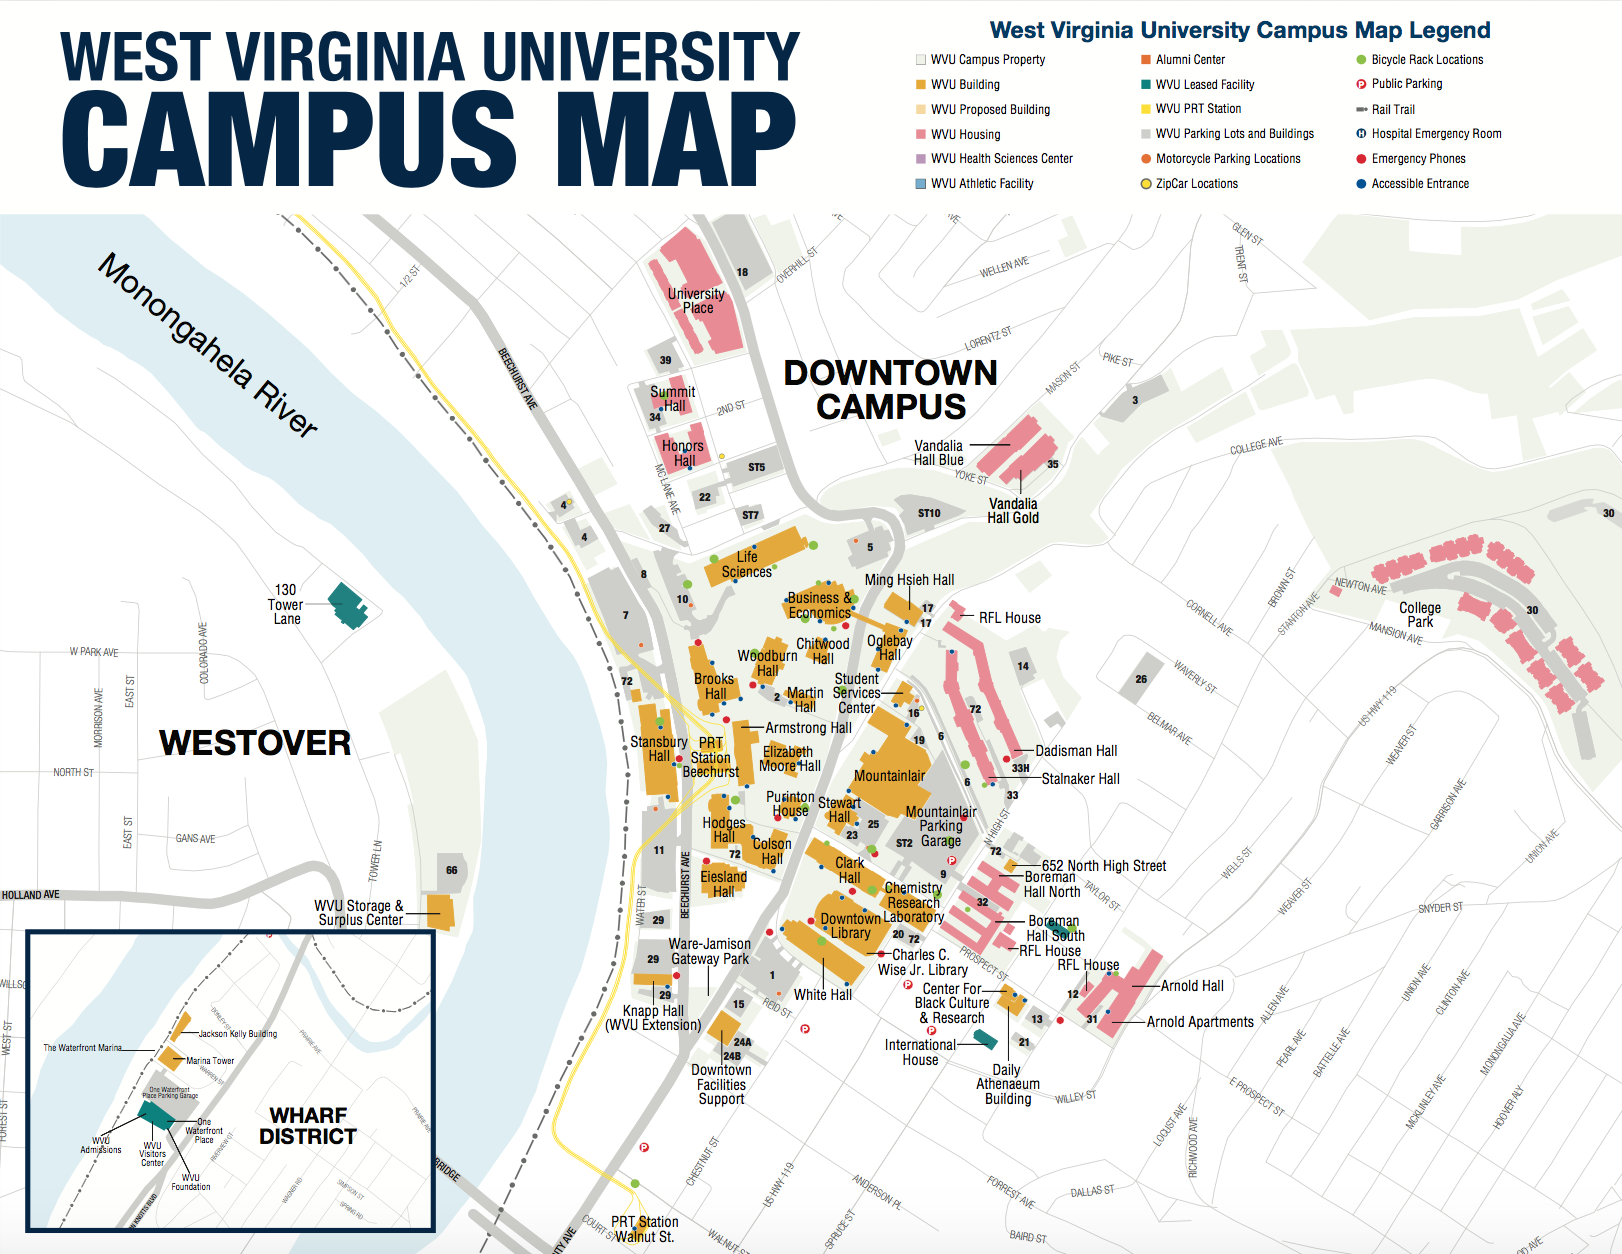 Grab A Downtown Campus Map To See One Of Our Three Campuses In 